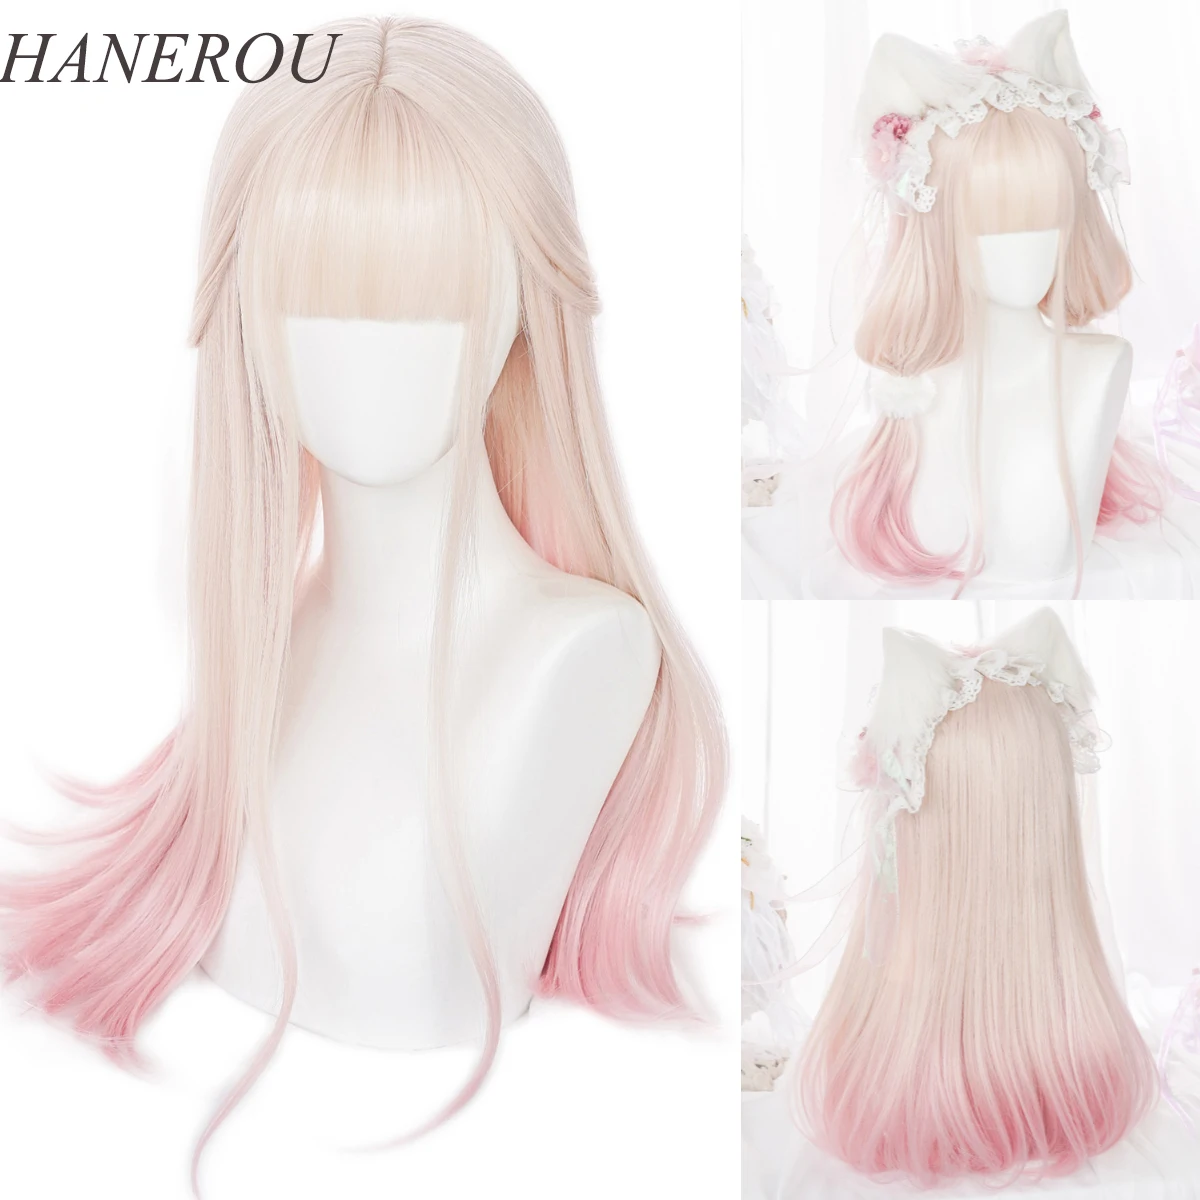 HANEROU Cos Lolita Wig Blonde Pink Hair for Party Long Straight Synthetic Cosplay Wigs for Women